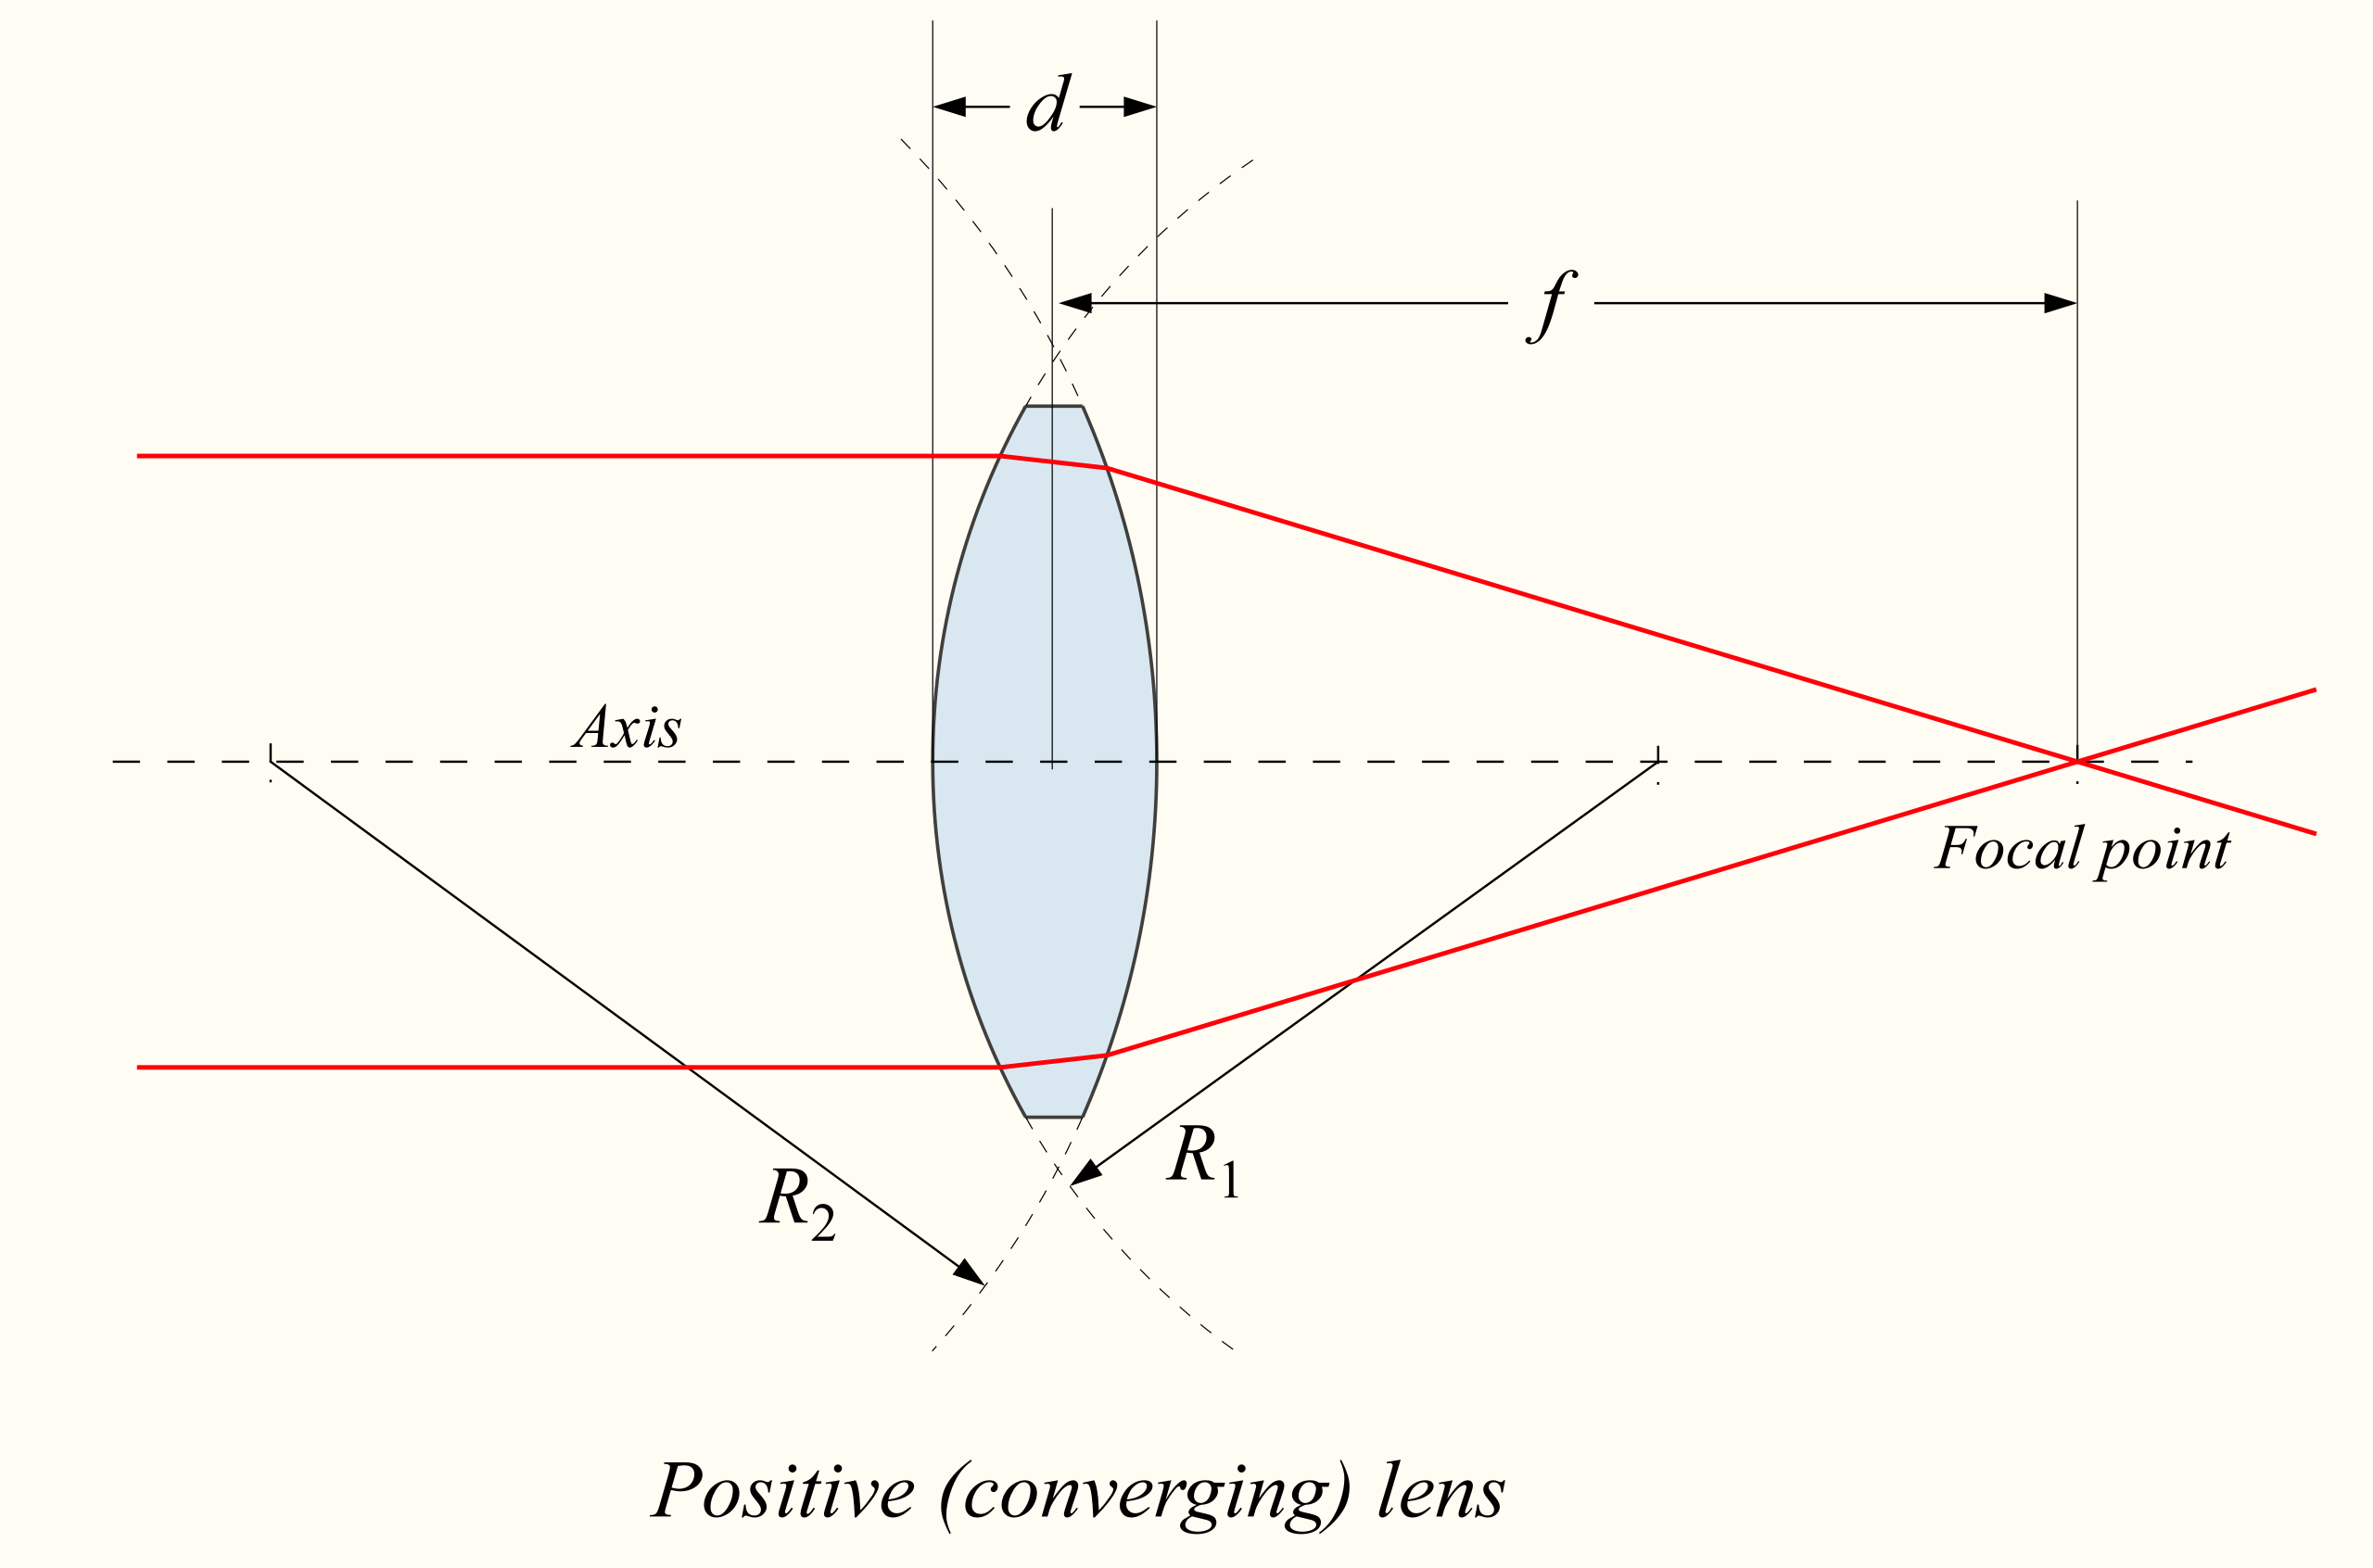 Measurements in a biconvex lens. [@drbob_positive_2006]. [CC BY 3.0 Unported](https://creativecommons.org/licenses/by/3.0/)